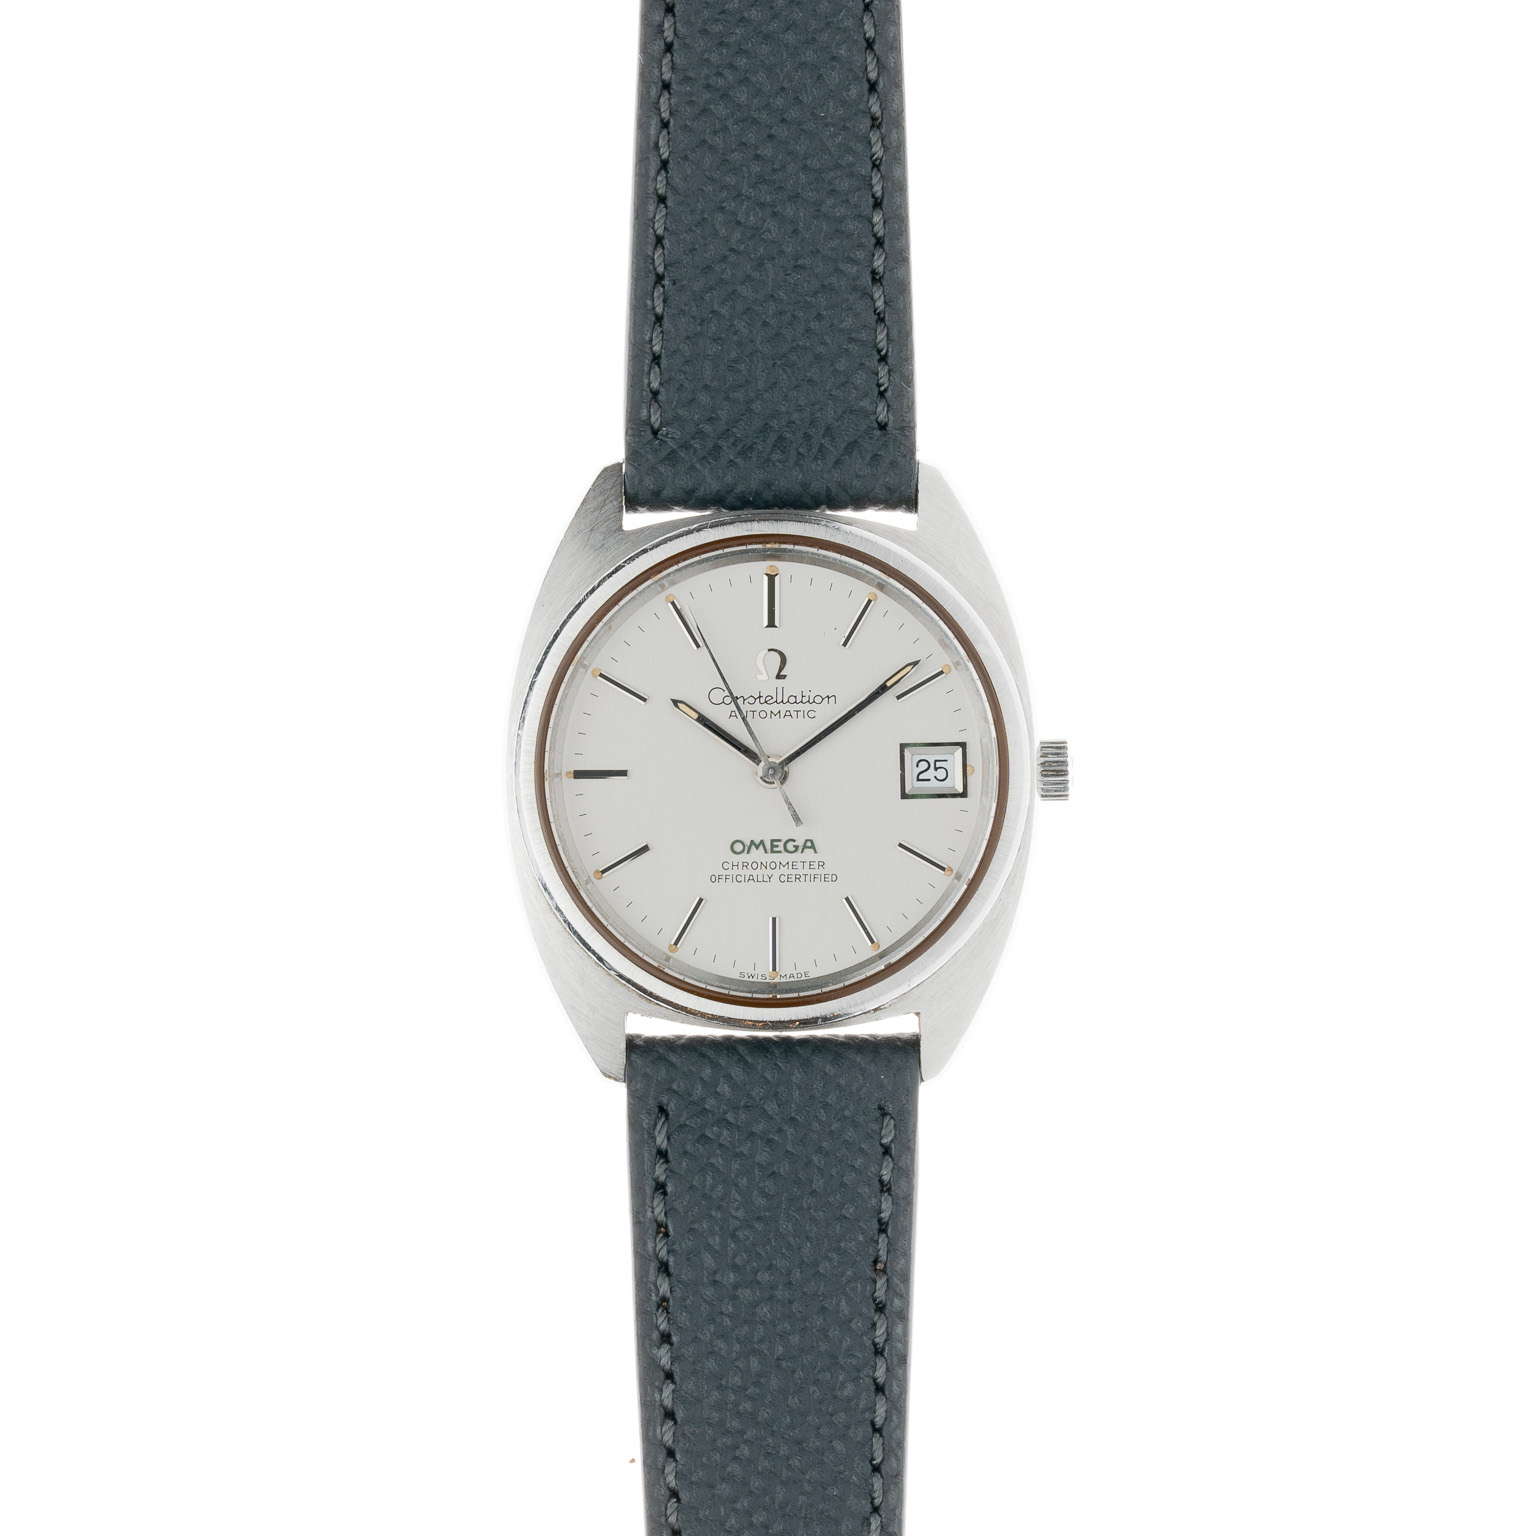 Omega constellation 168.0056 watch japan dial